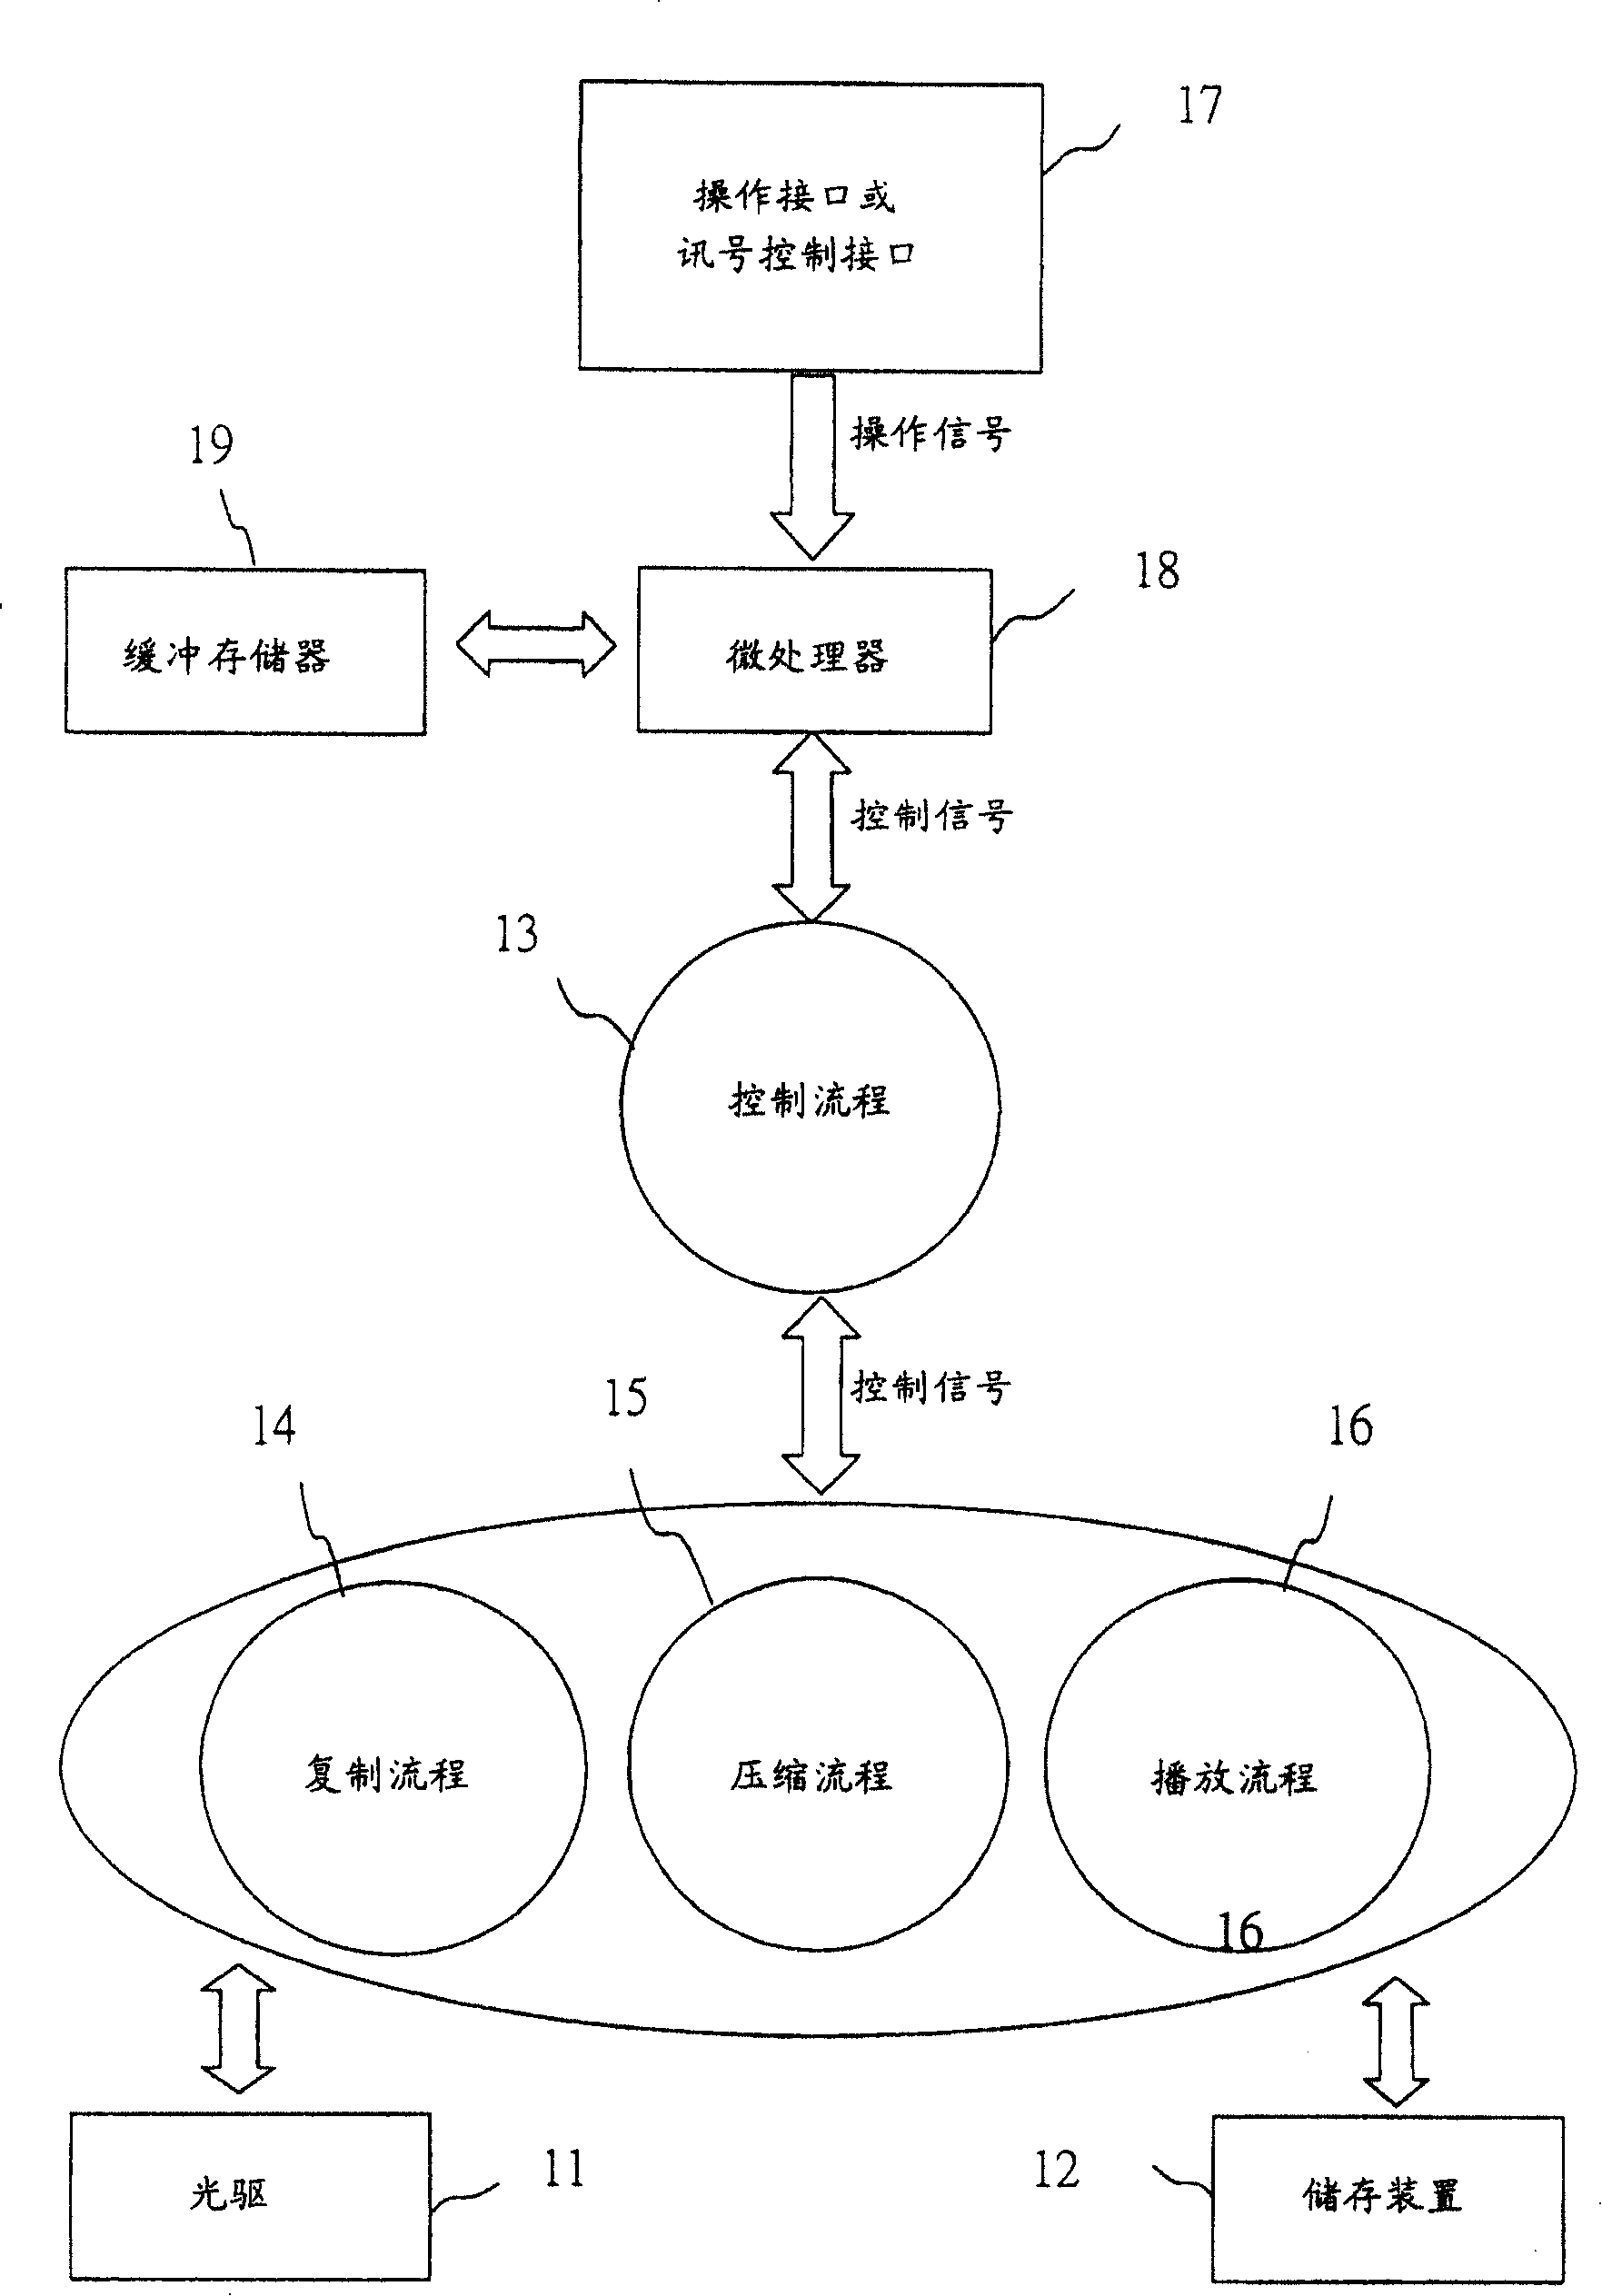 Method and apparatus for audio information storage broadcasting